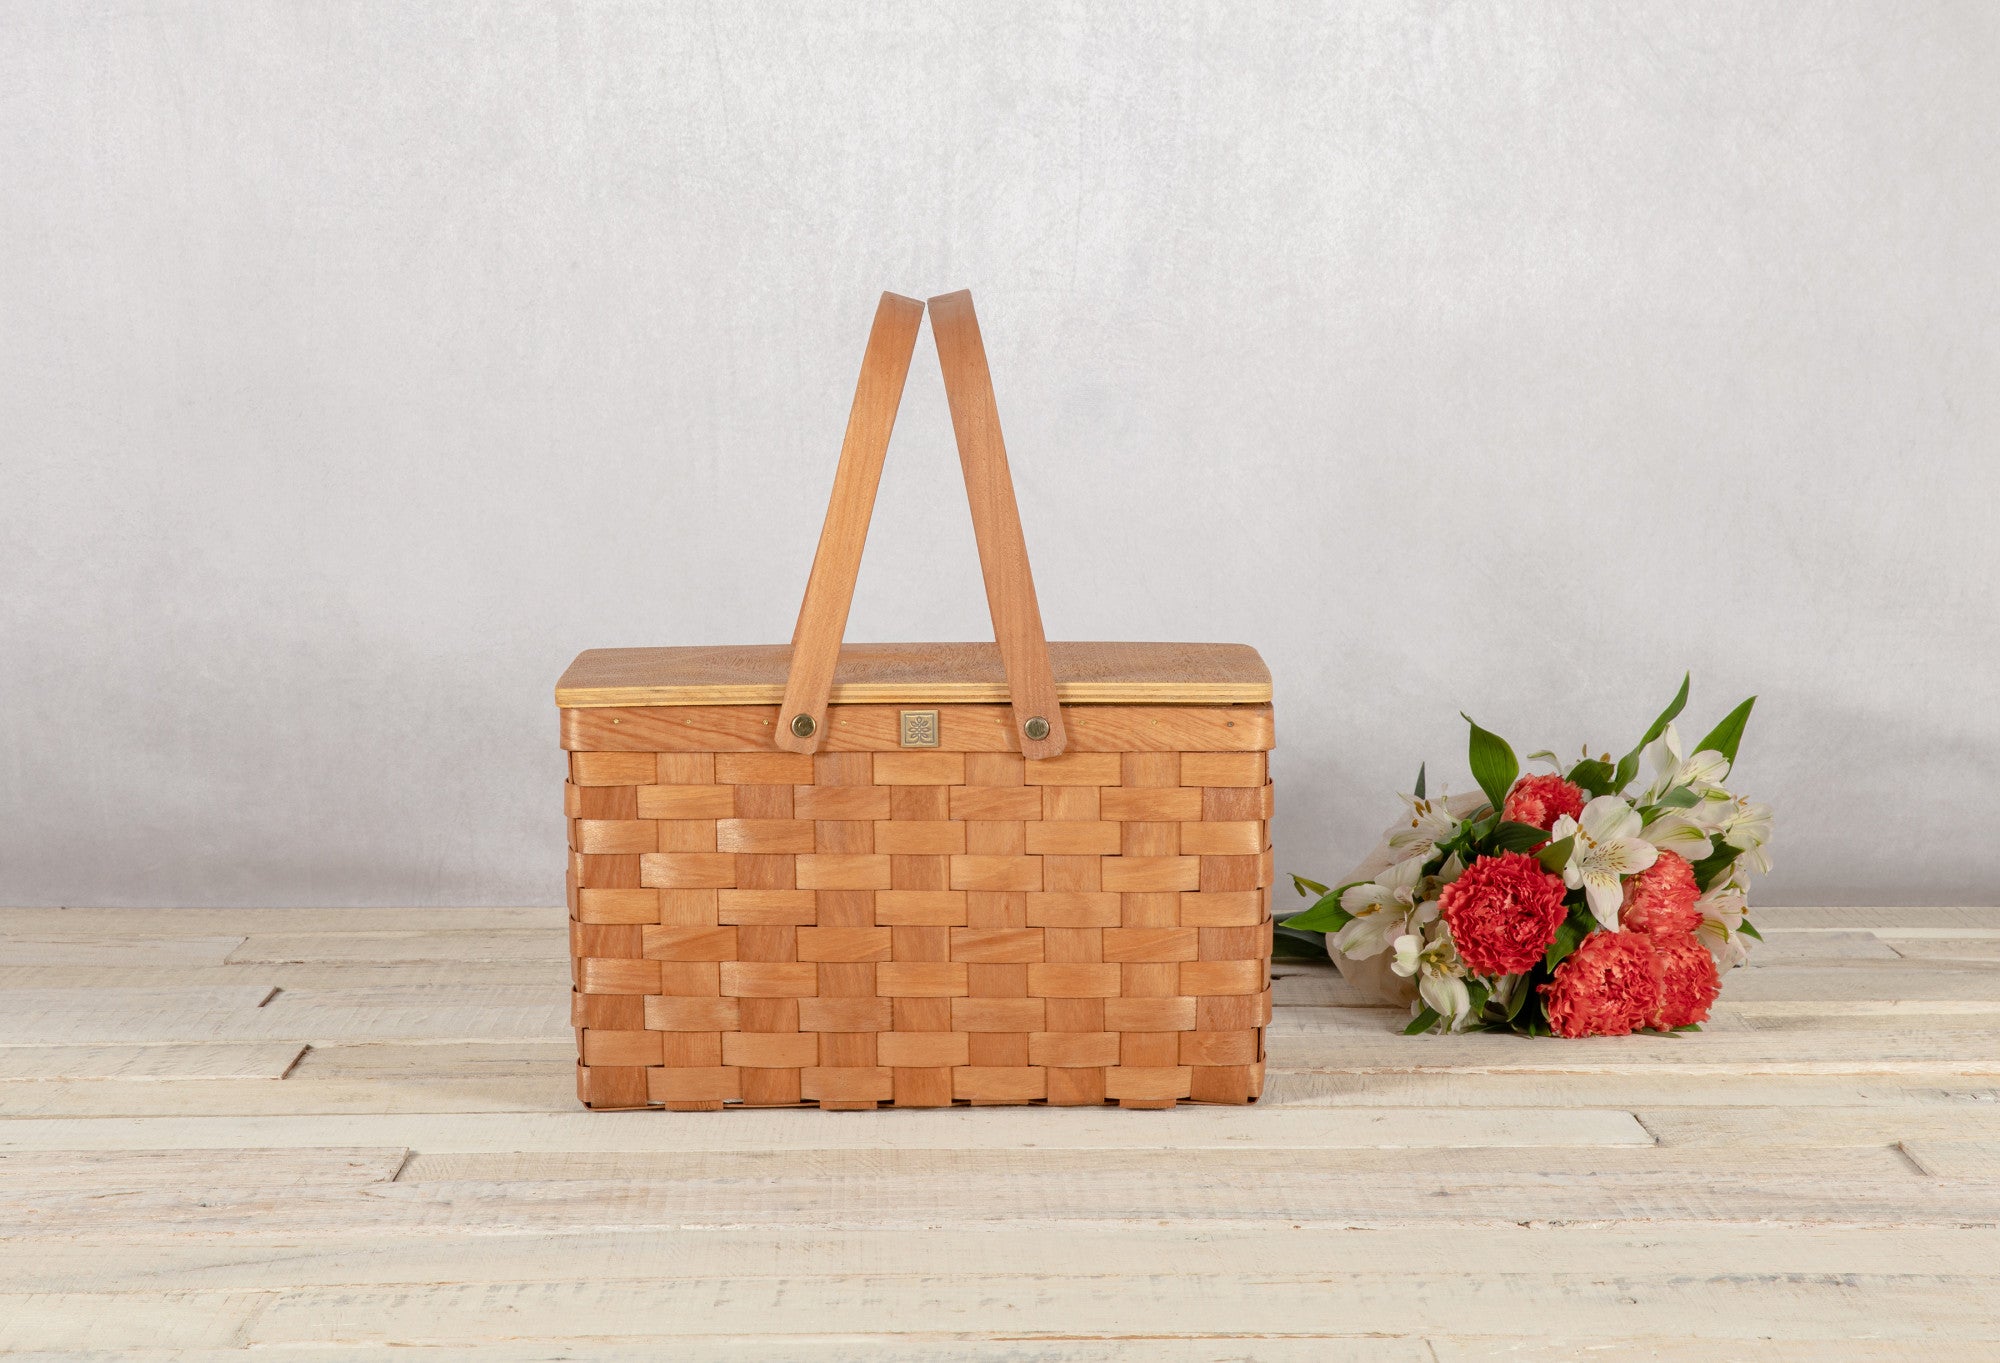 Mickey Mouse - Poppy Personal Picnic Basket